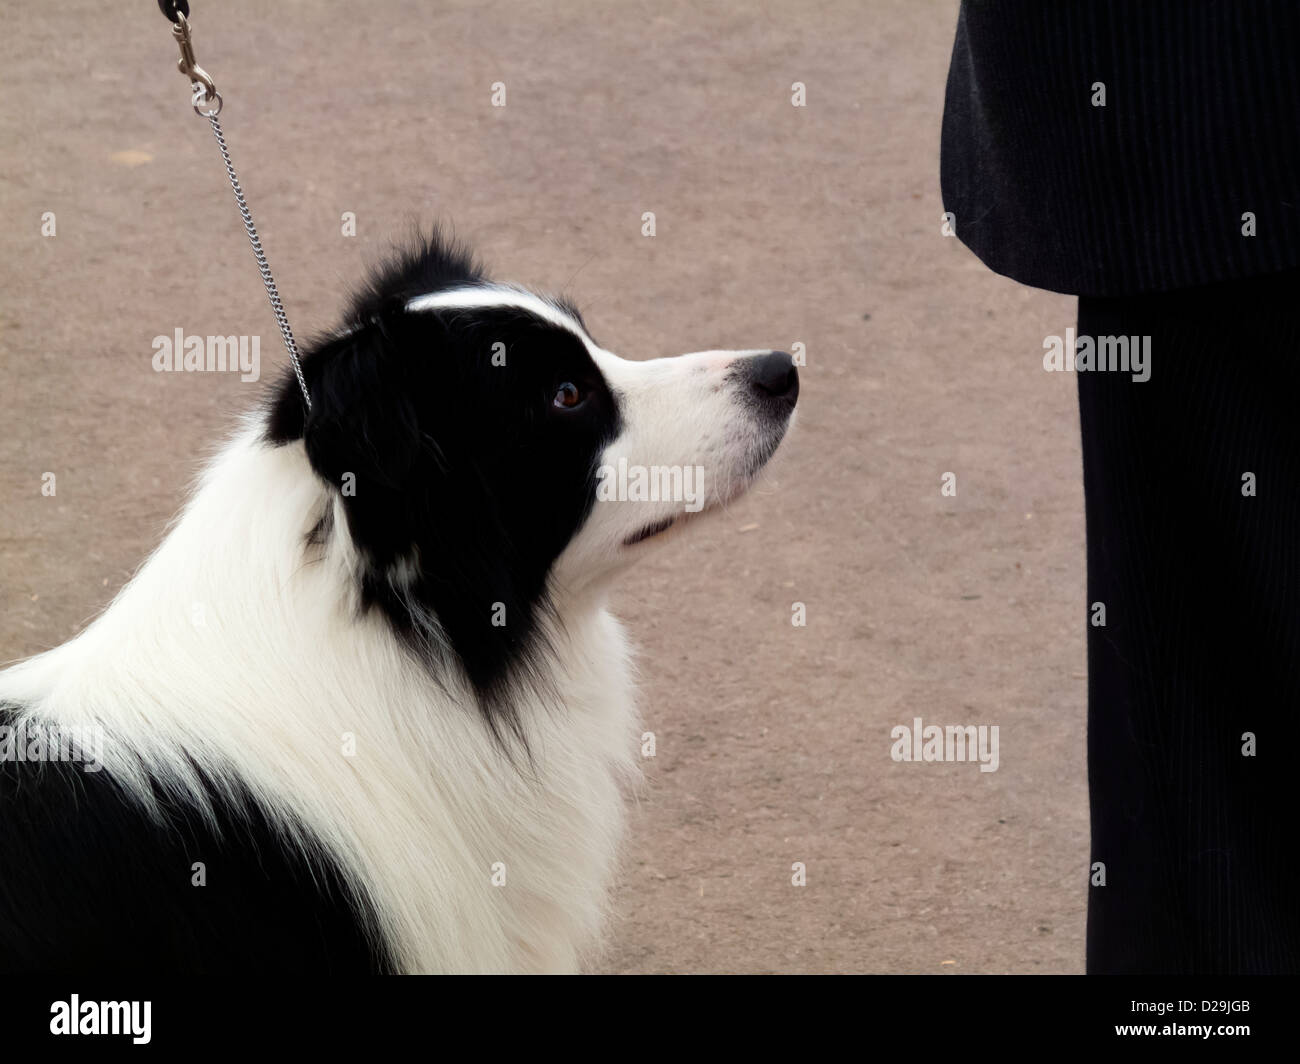 Pure bred pedigree sheepdog on lead looking up at a person dressed in black Stock Photo